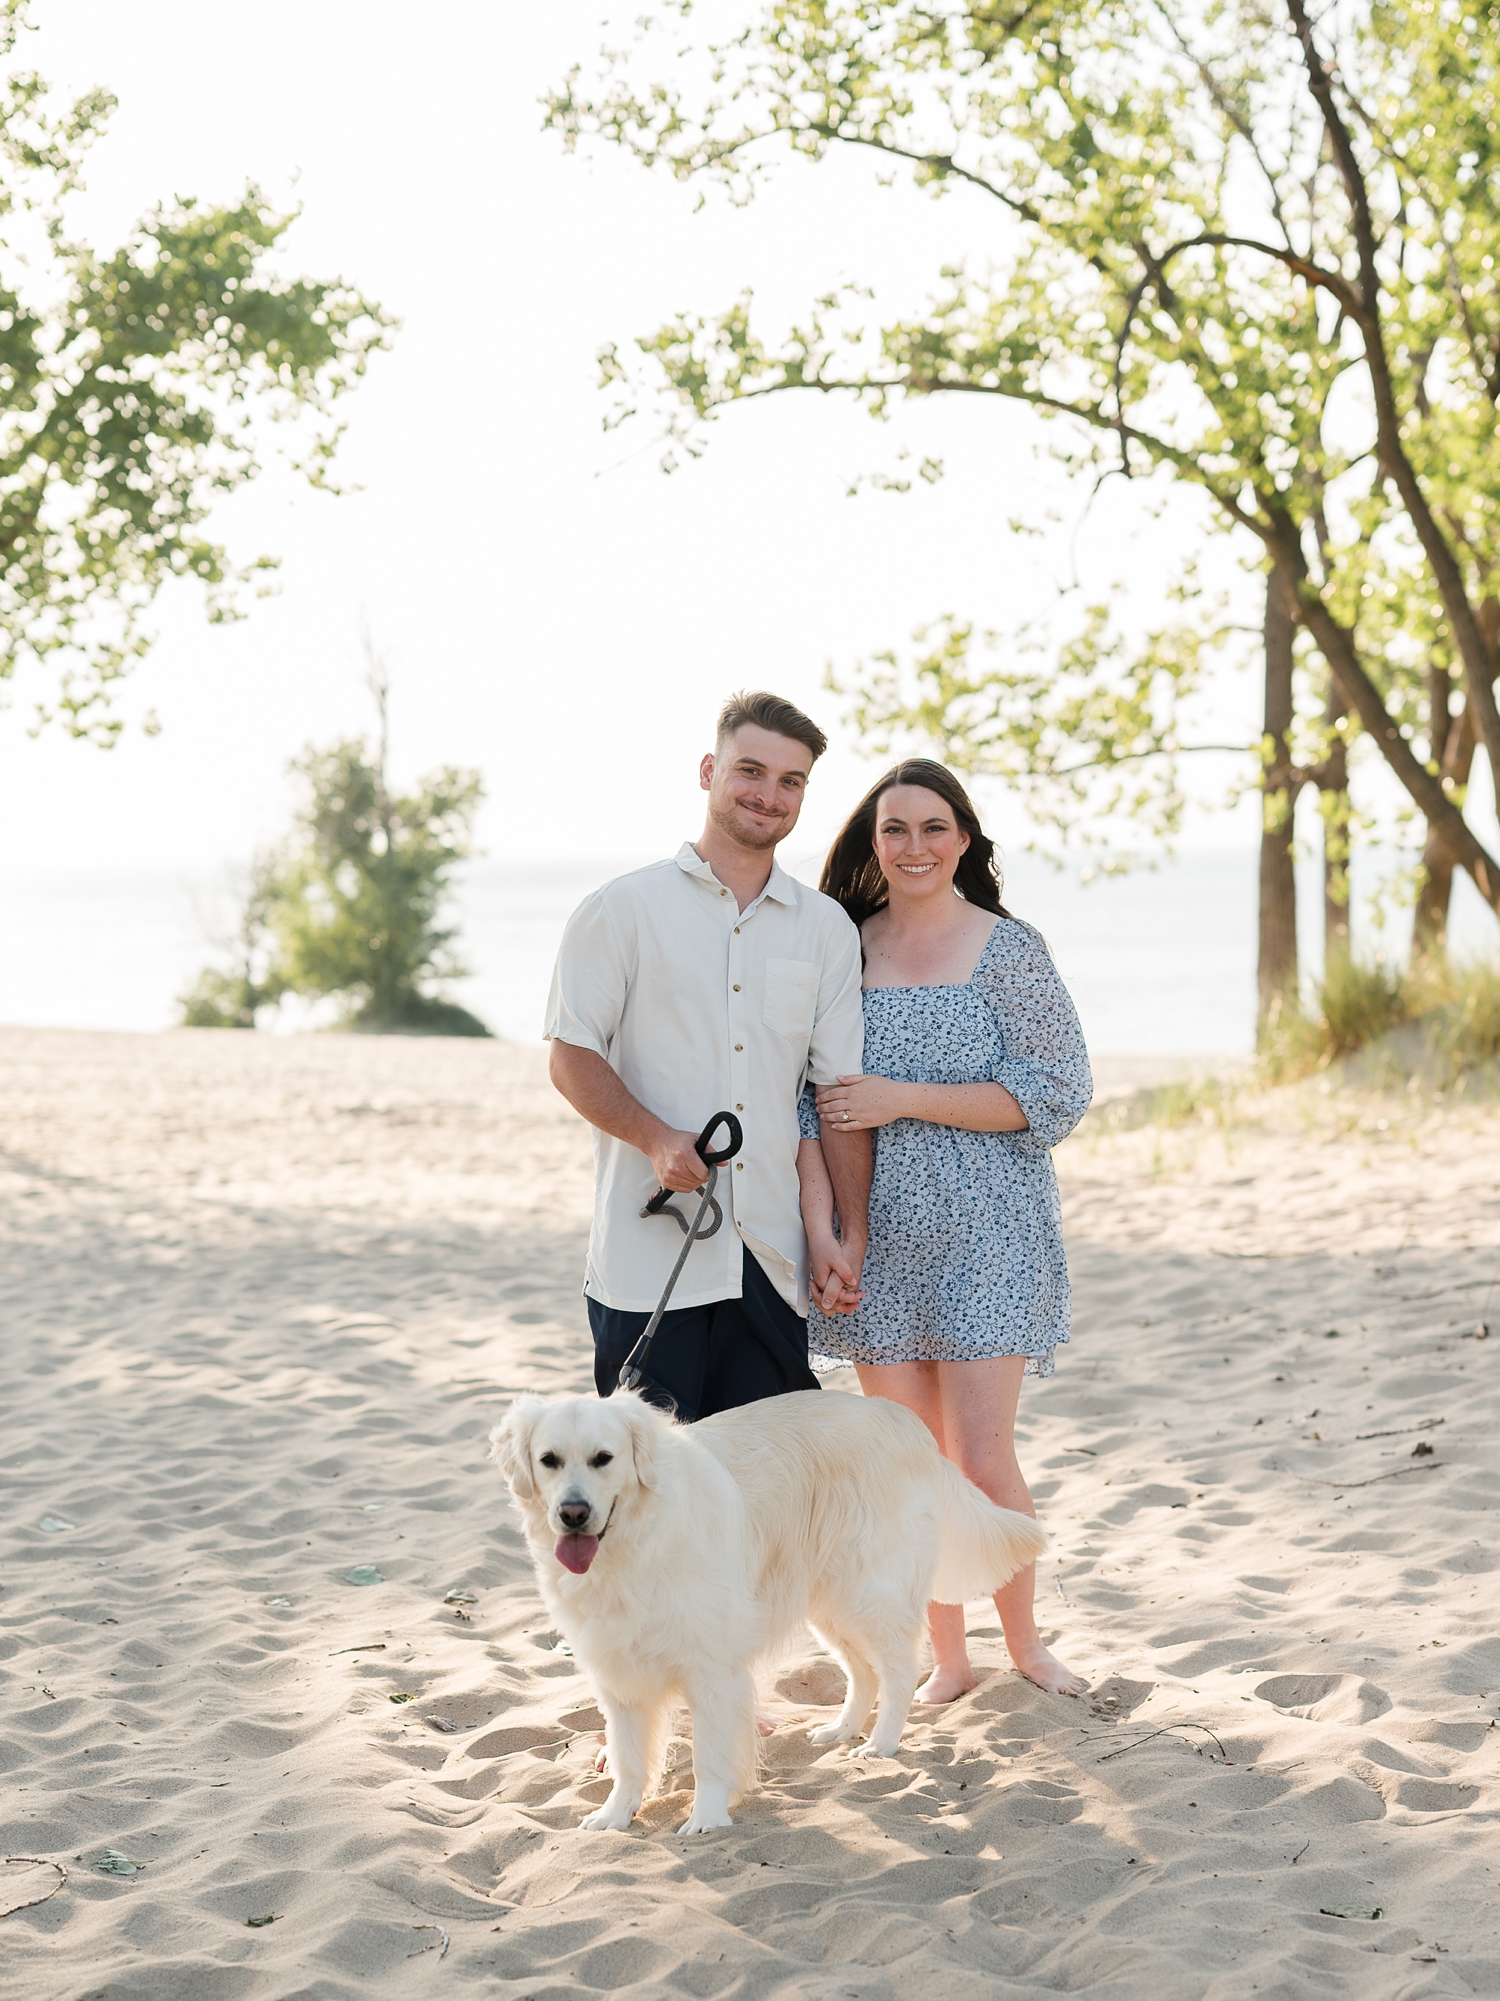 Indiana Dunes Engagement Photos by South Bend Wedding Photographer Courtney Rudicel with golden retriever